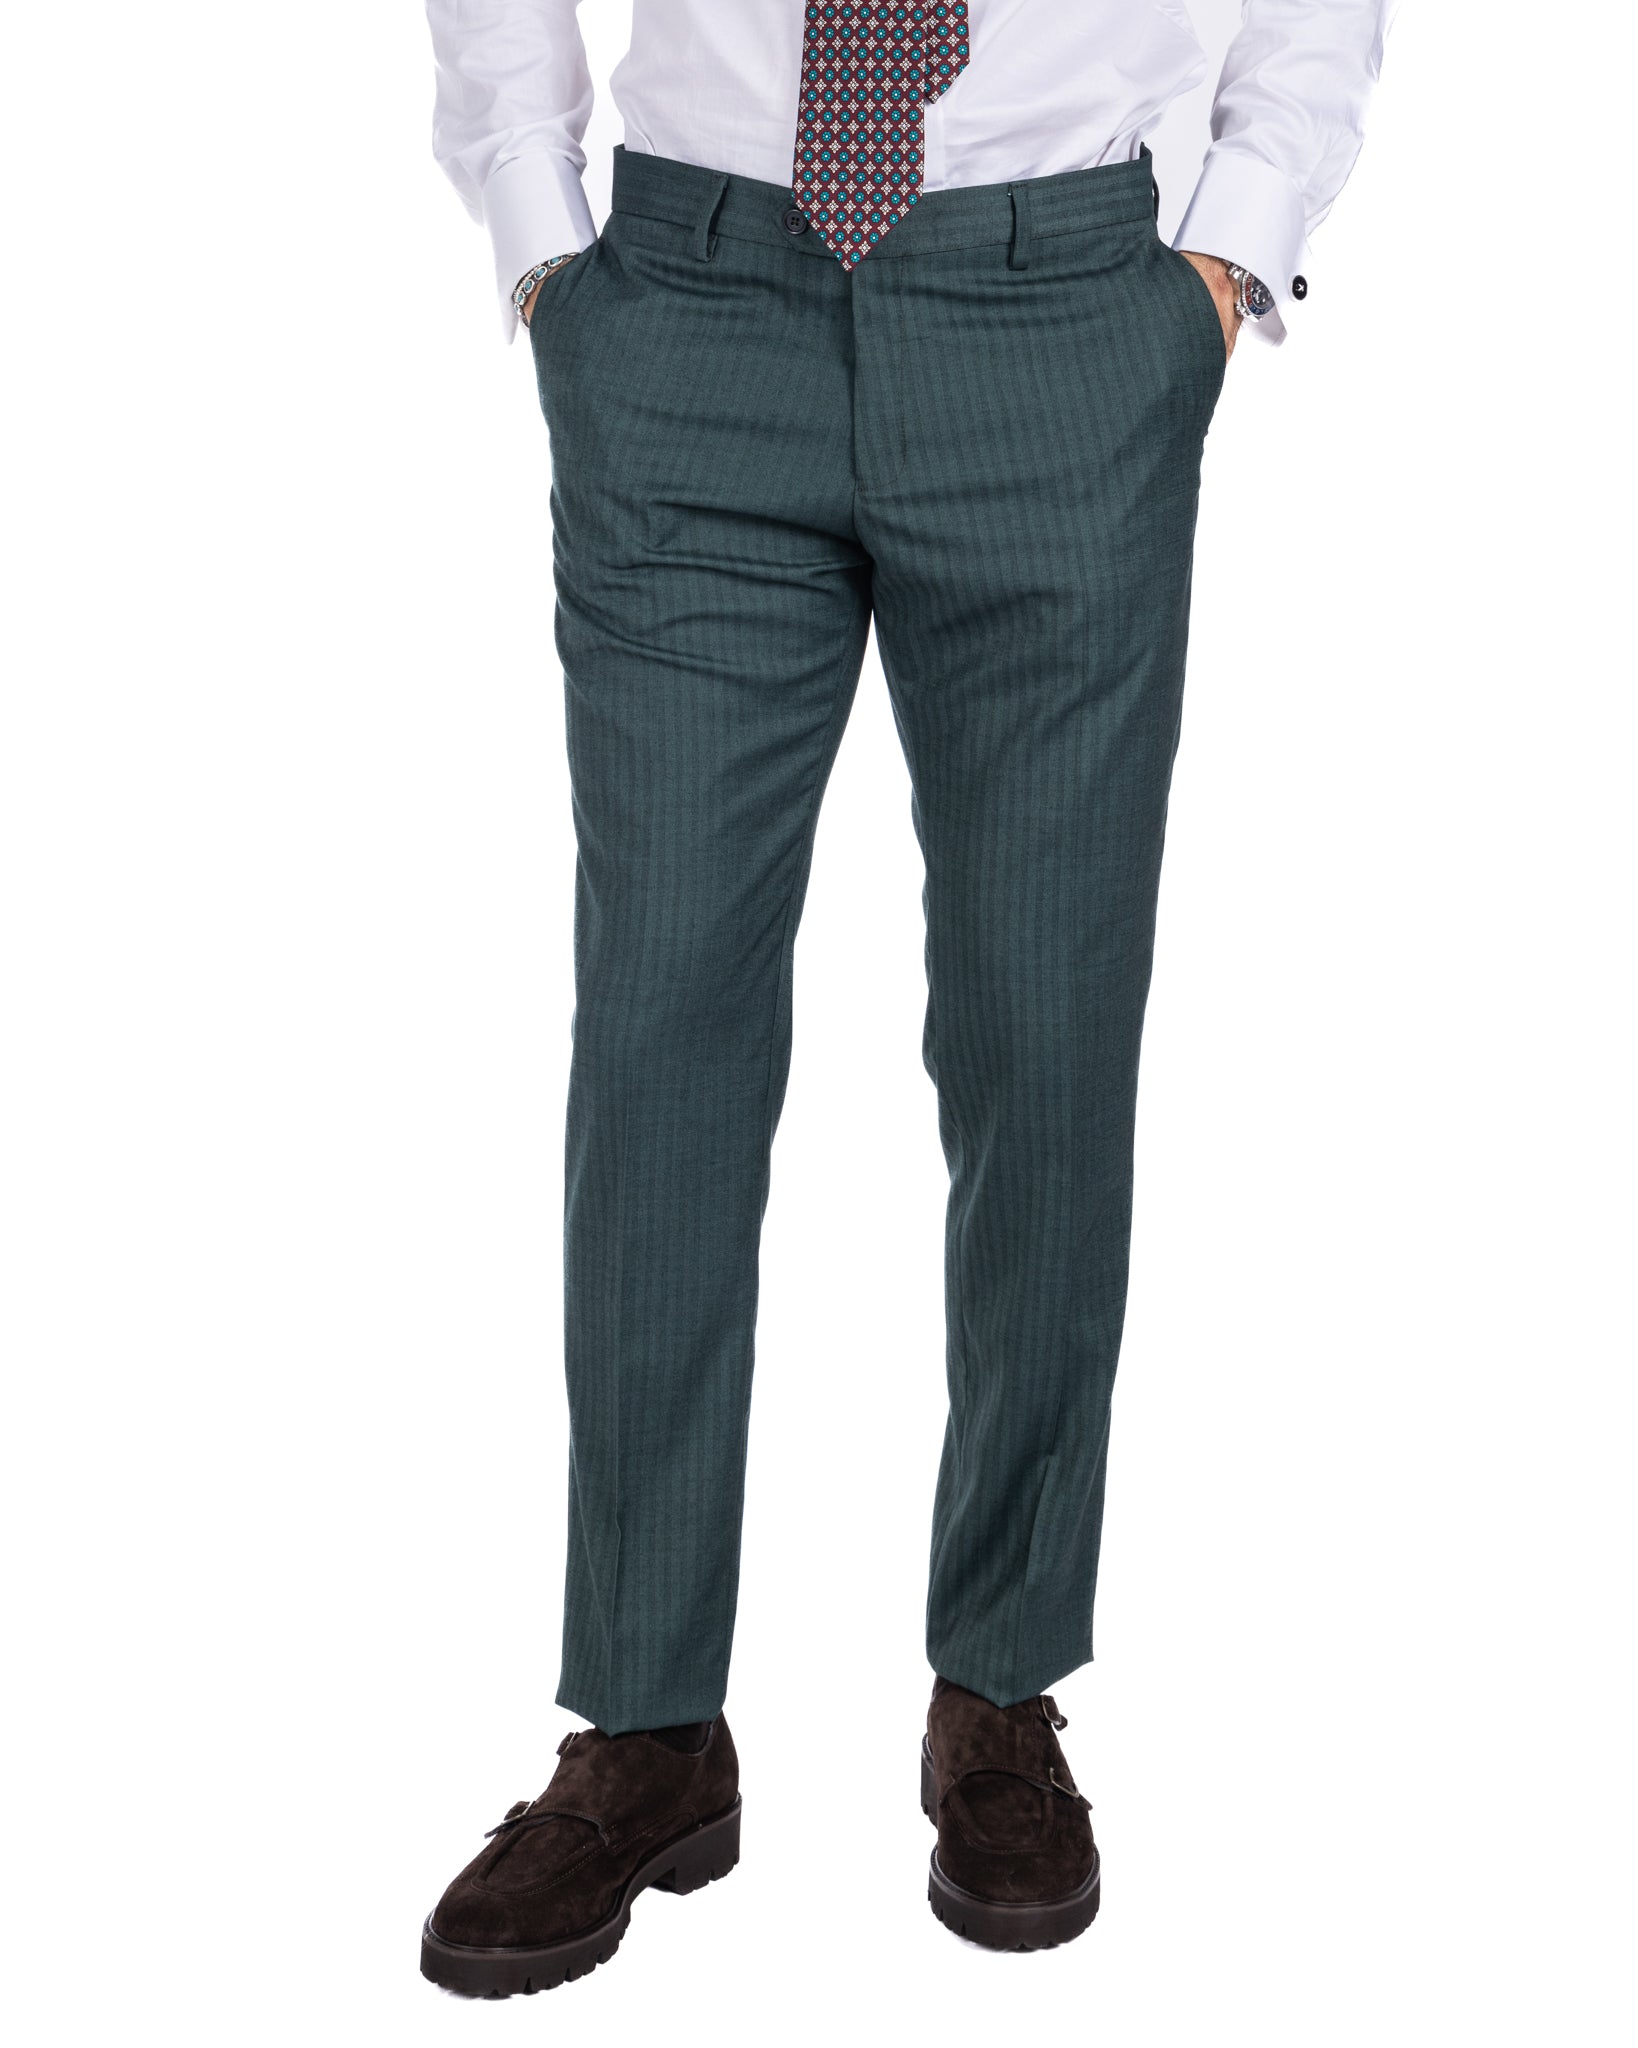 Marseille - green solaro double-breasted suit with chrome buttons